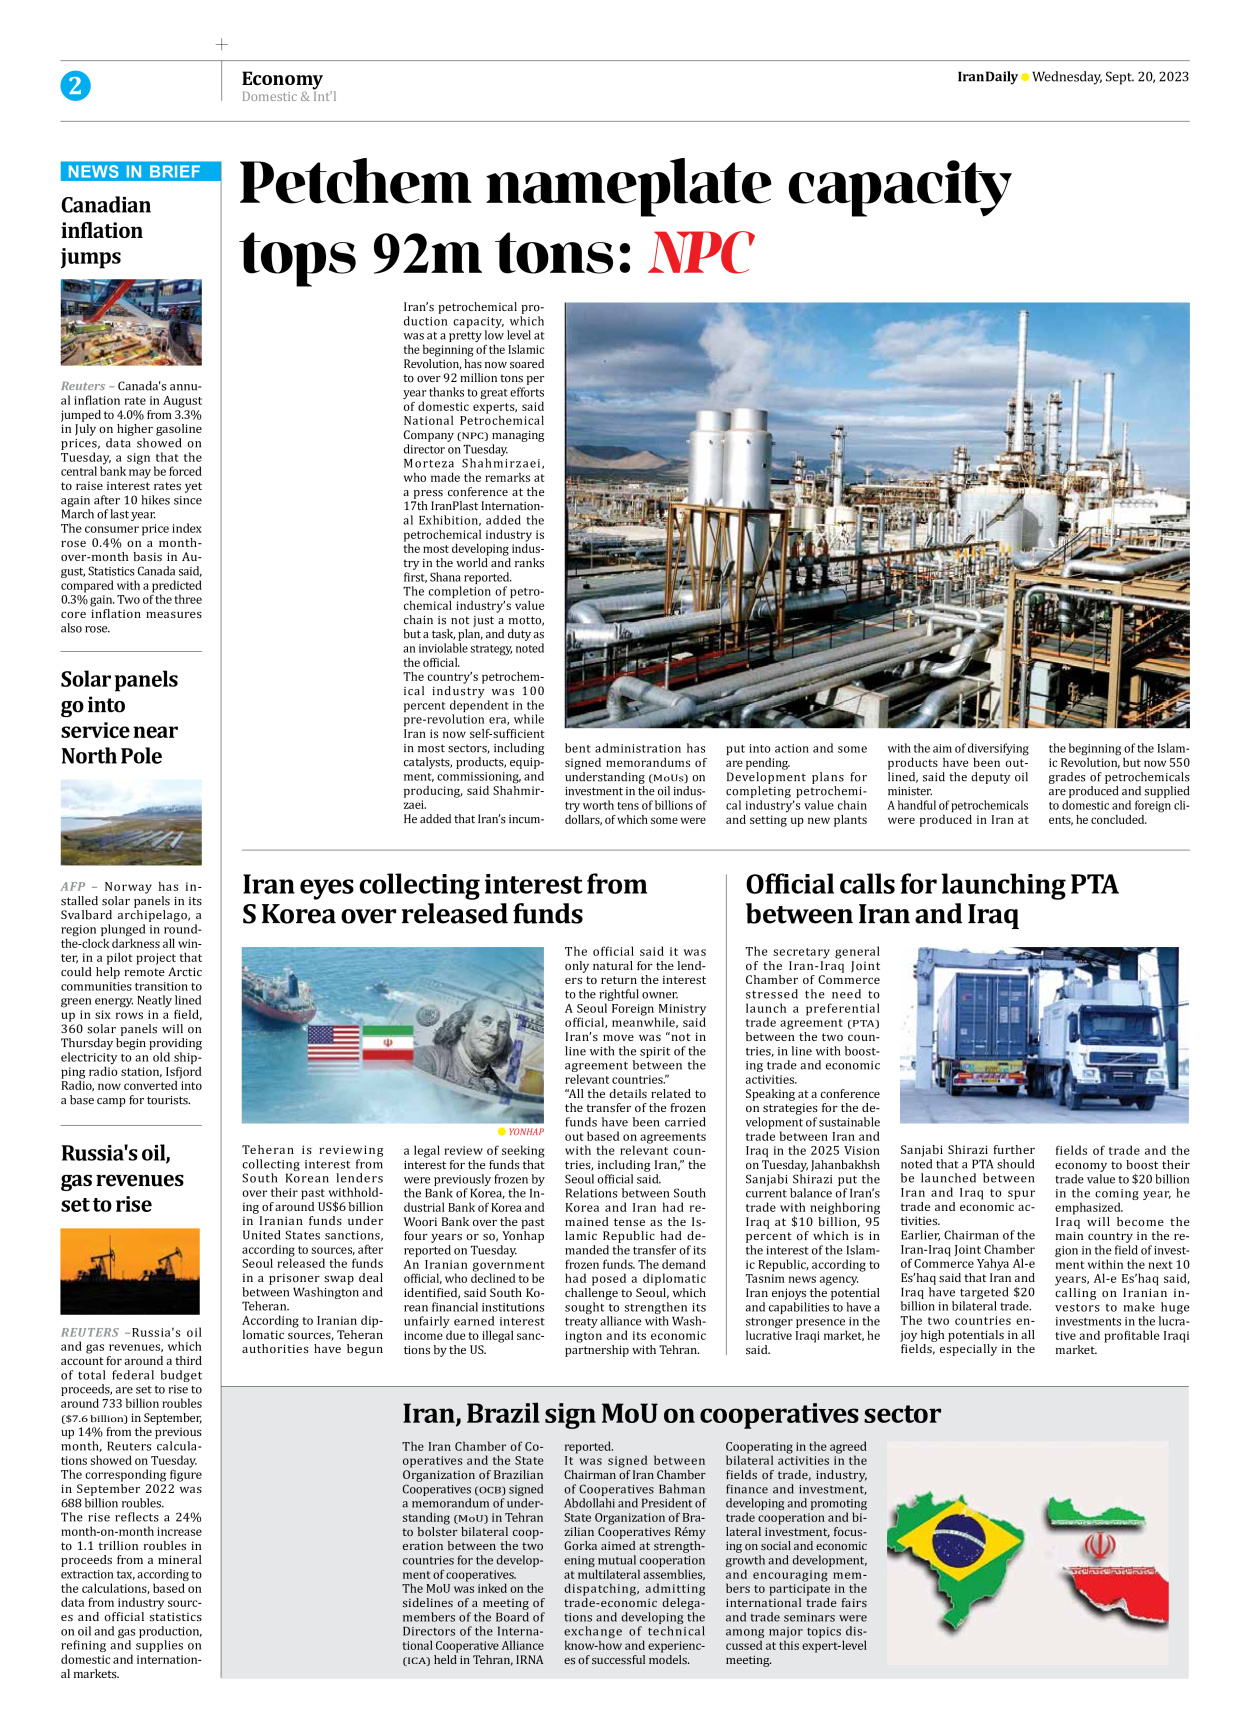 Iran Daily - Number Seven Thousand Three Hundred and Ninety - 20 September 2023 - Page 2